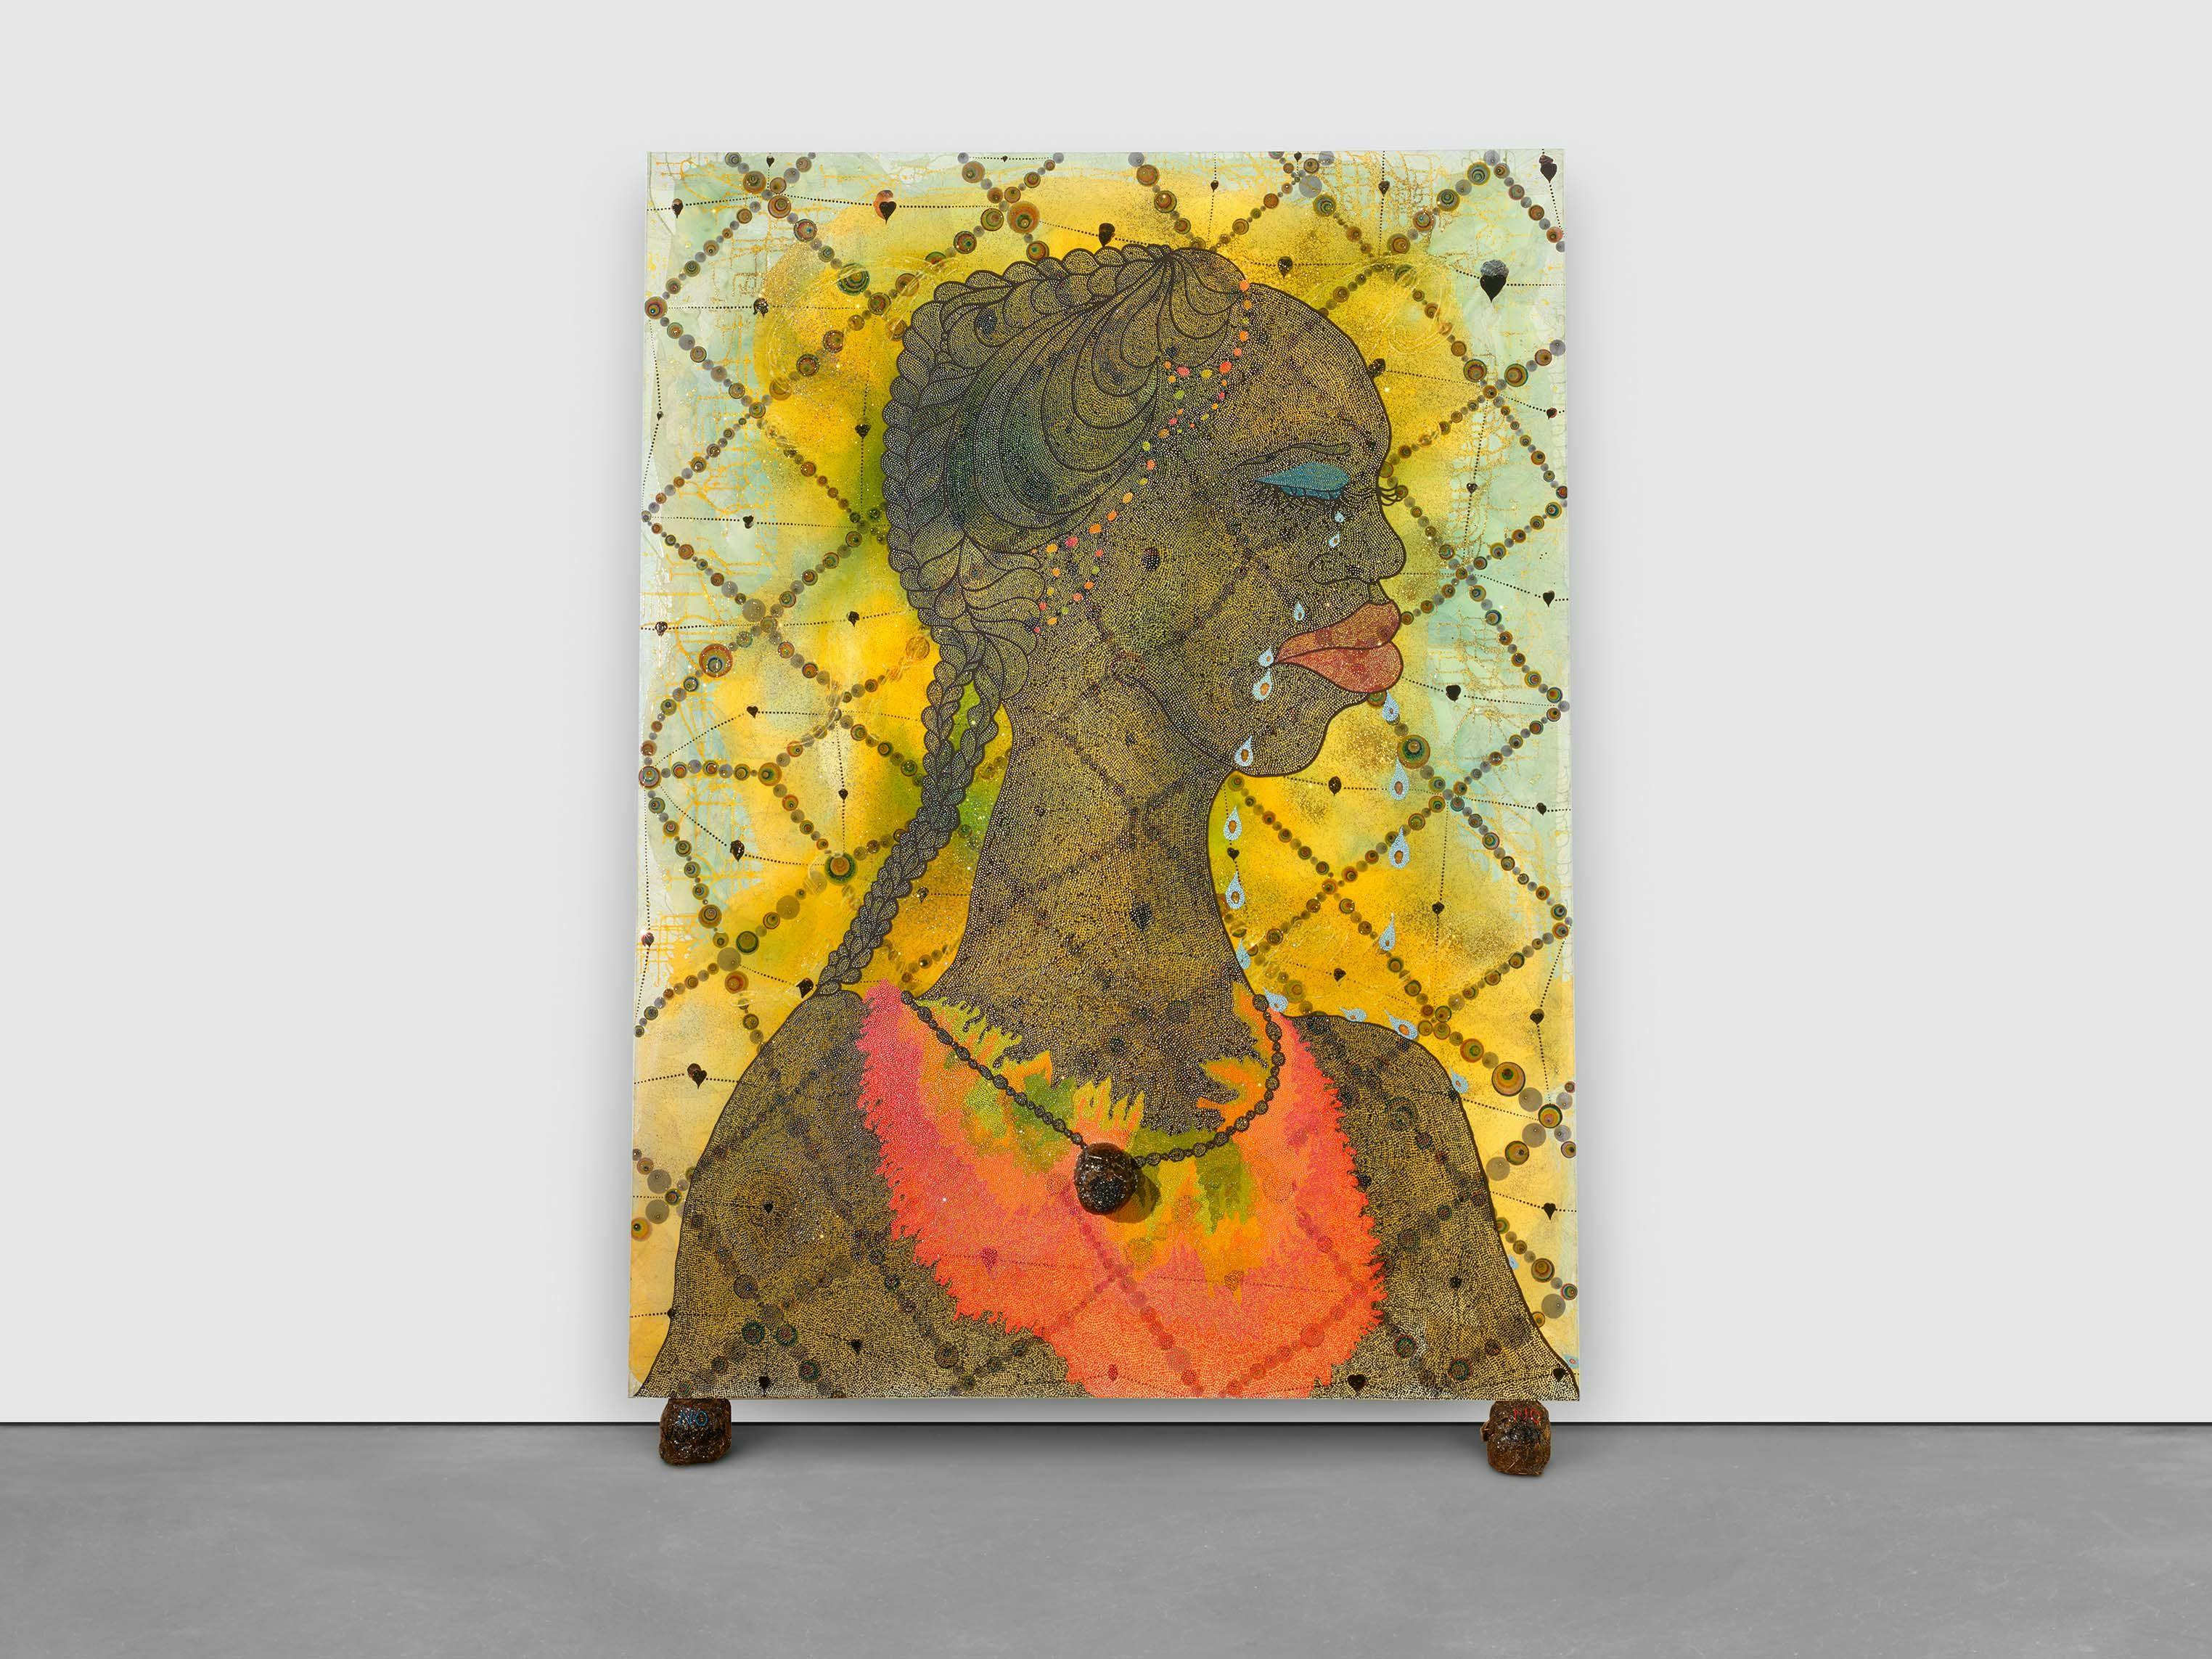 A mixed media artwork by Chris Ofili, titled No Woman, No Cry, dated 1998.